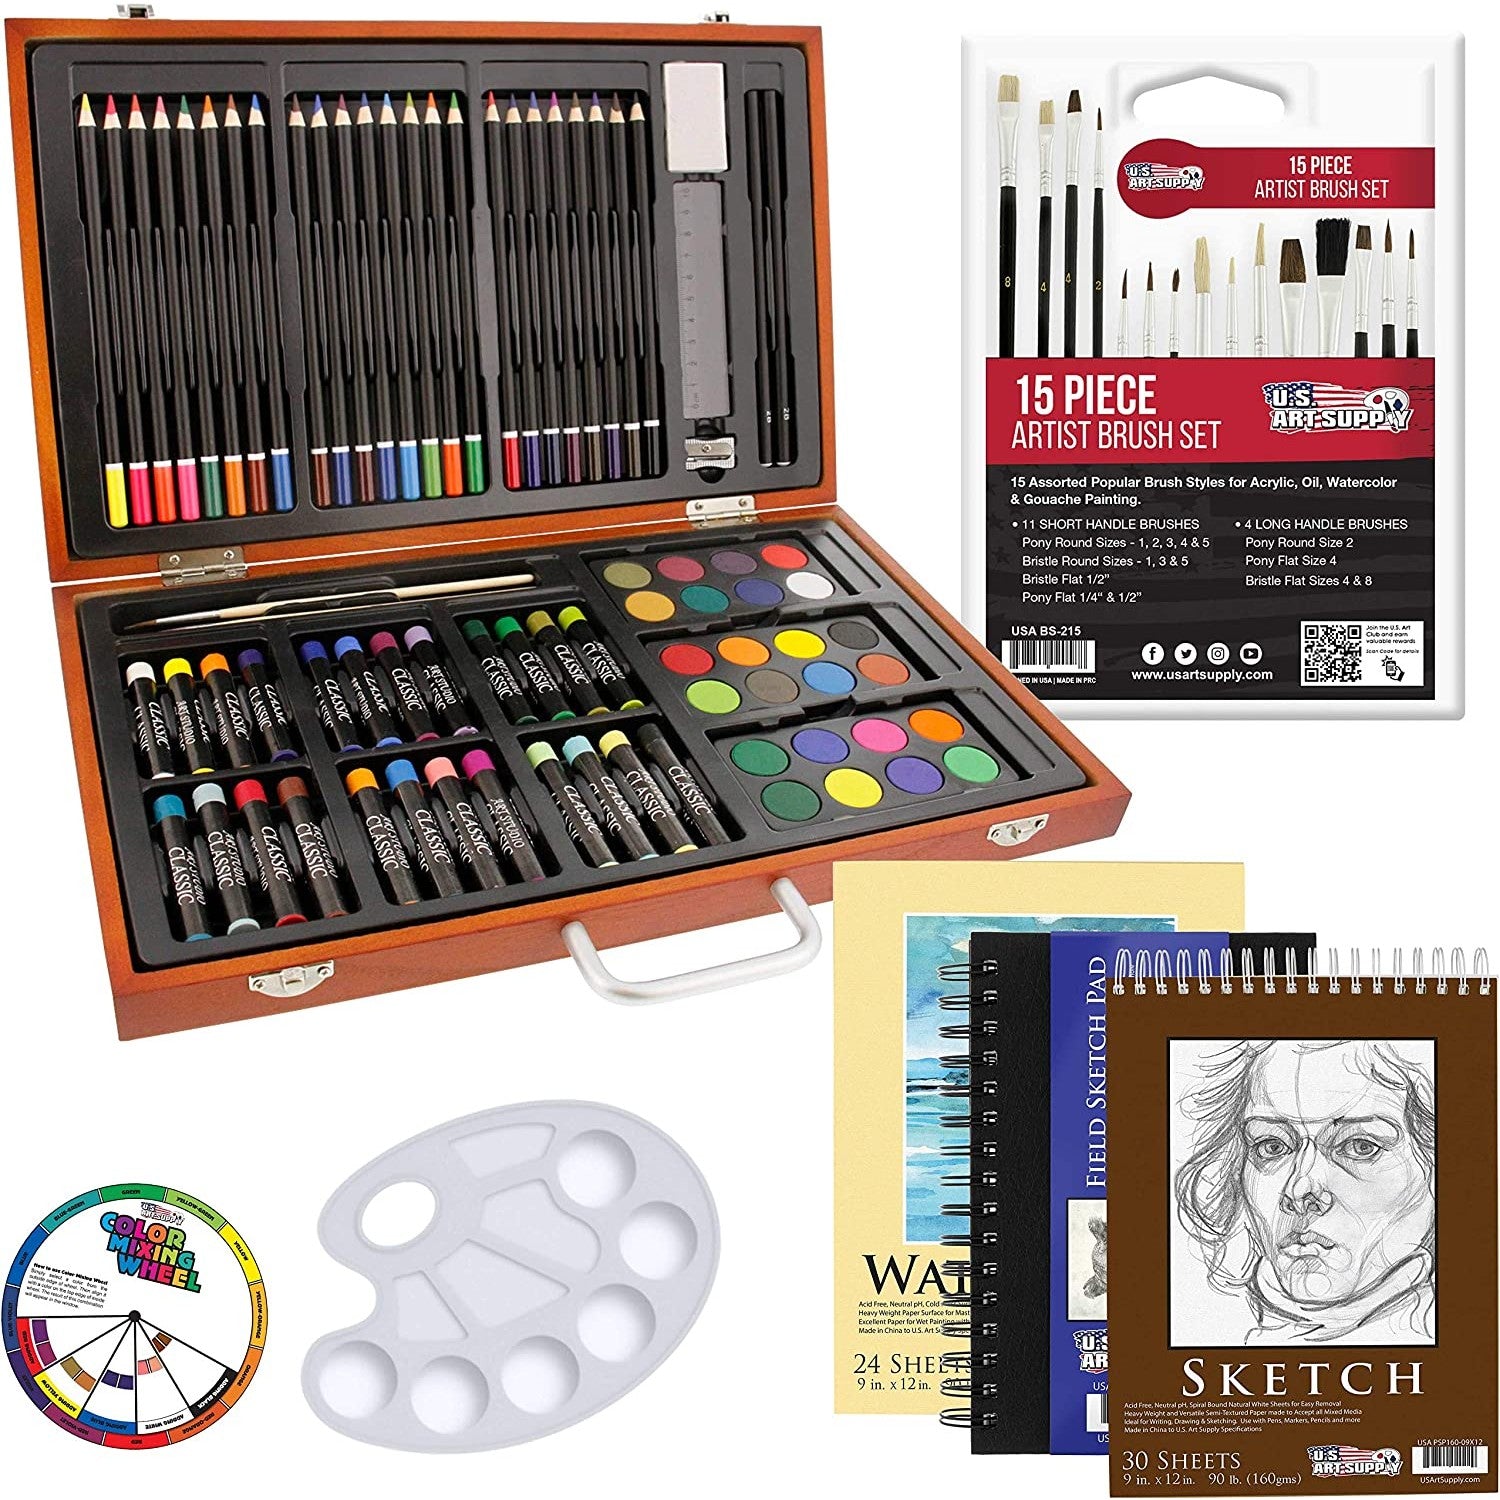 A 102 piece art drawing set in a wooden case with all the inclusions laid out.